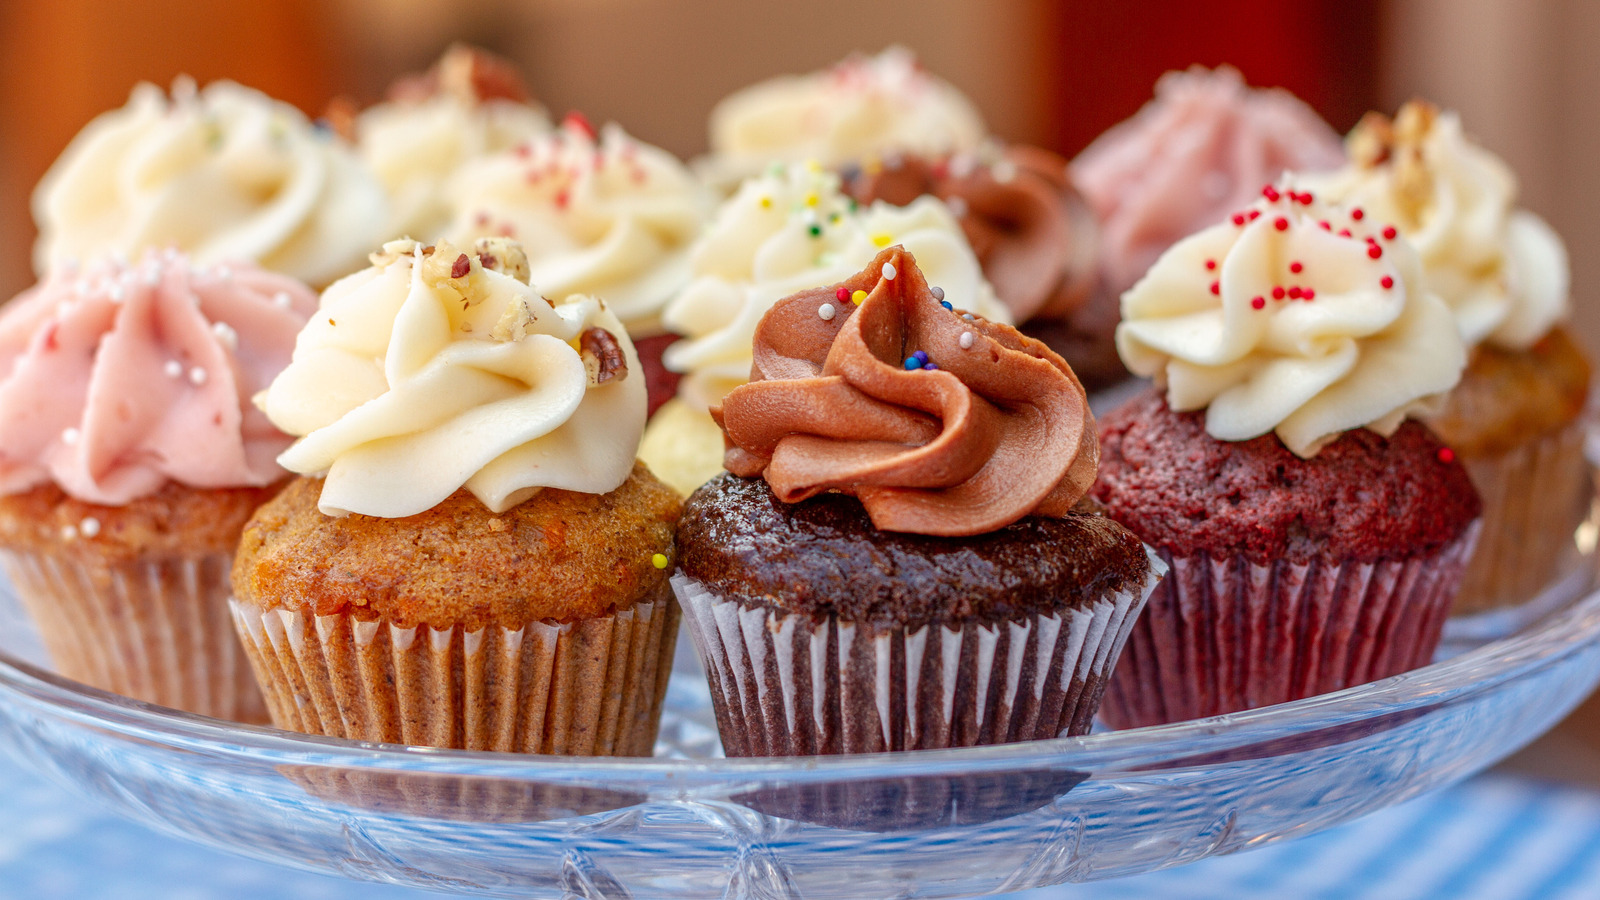 7 Reasons You Should Never Use Muffin Liners